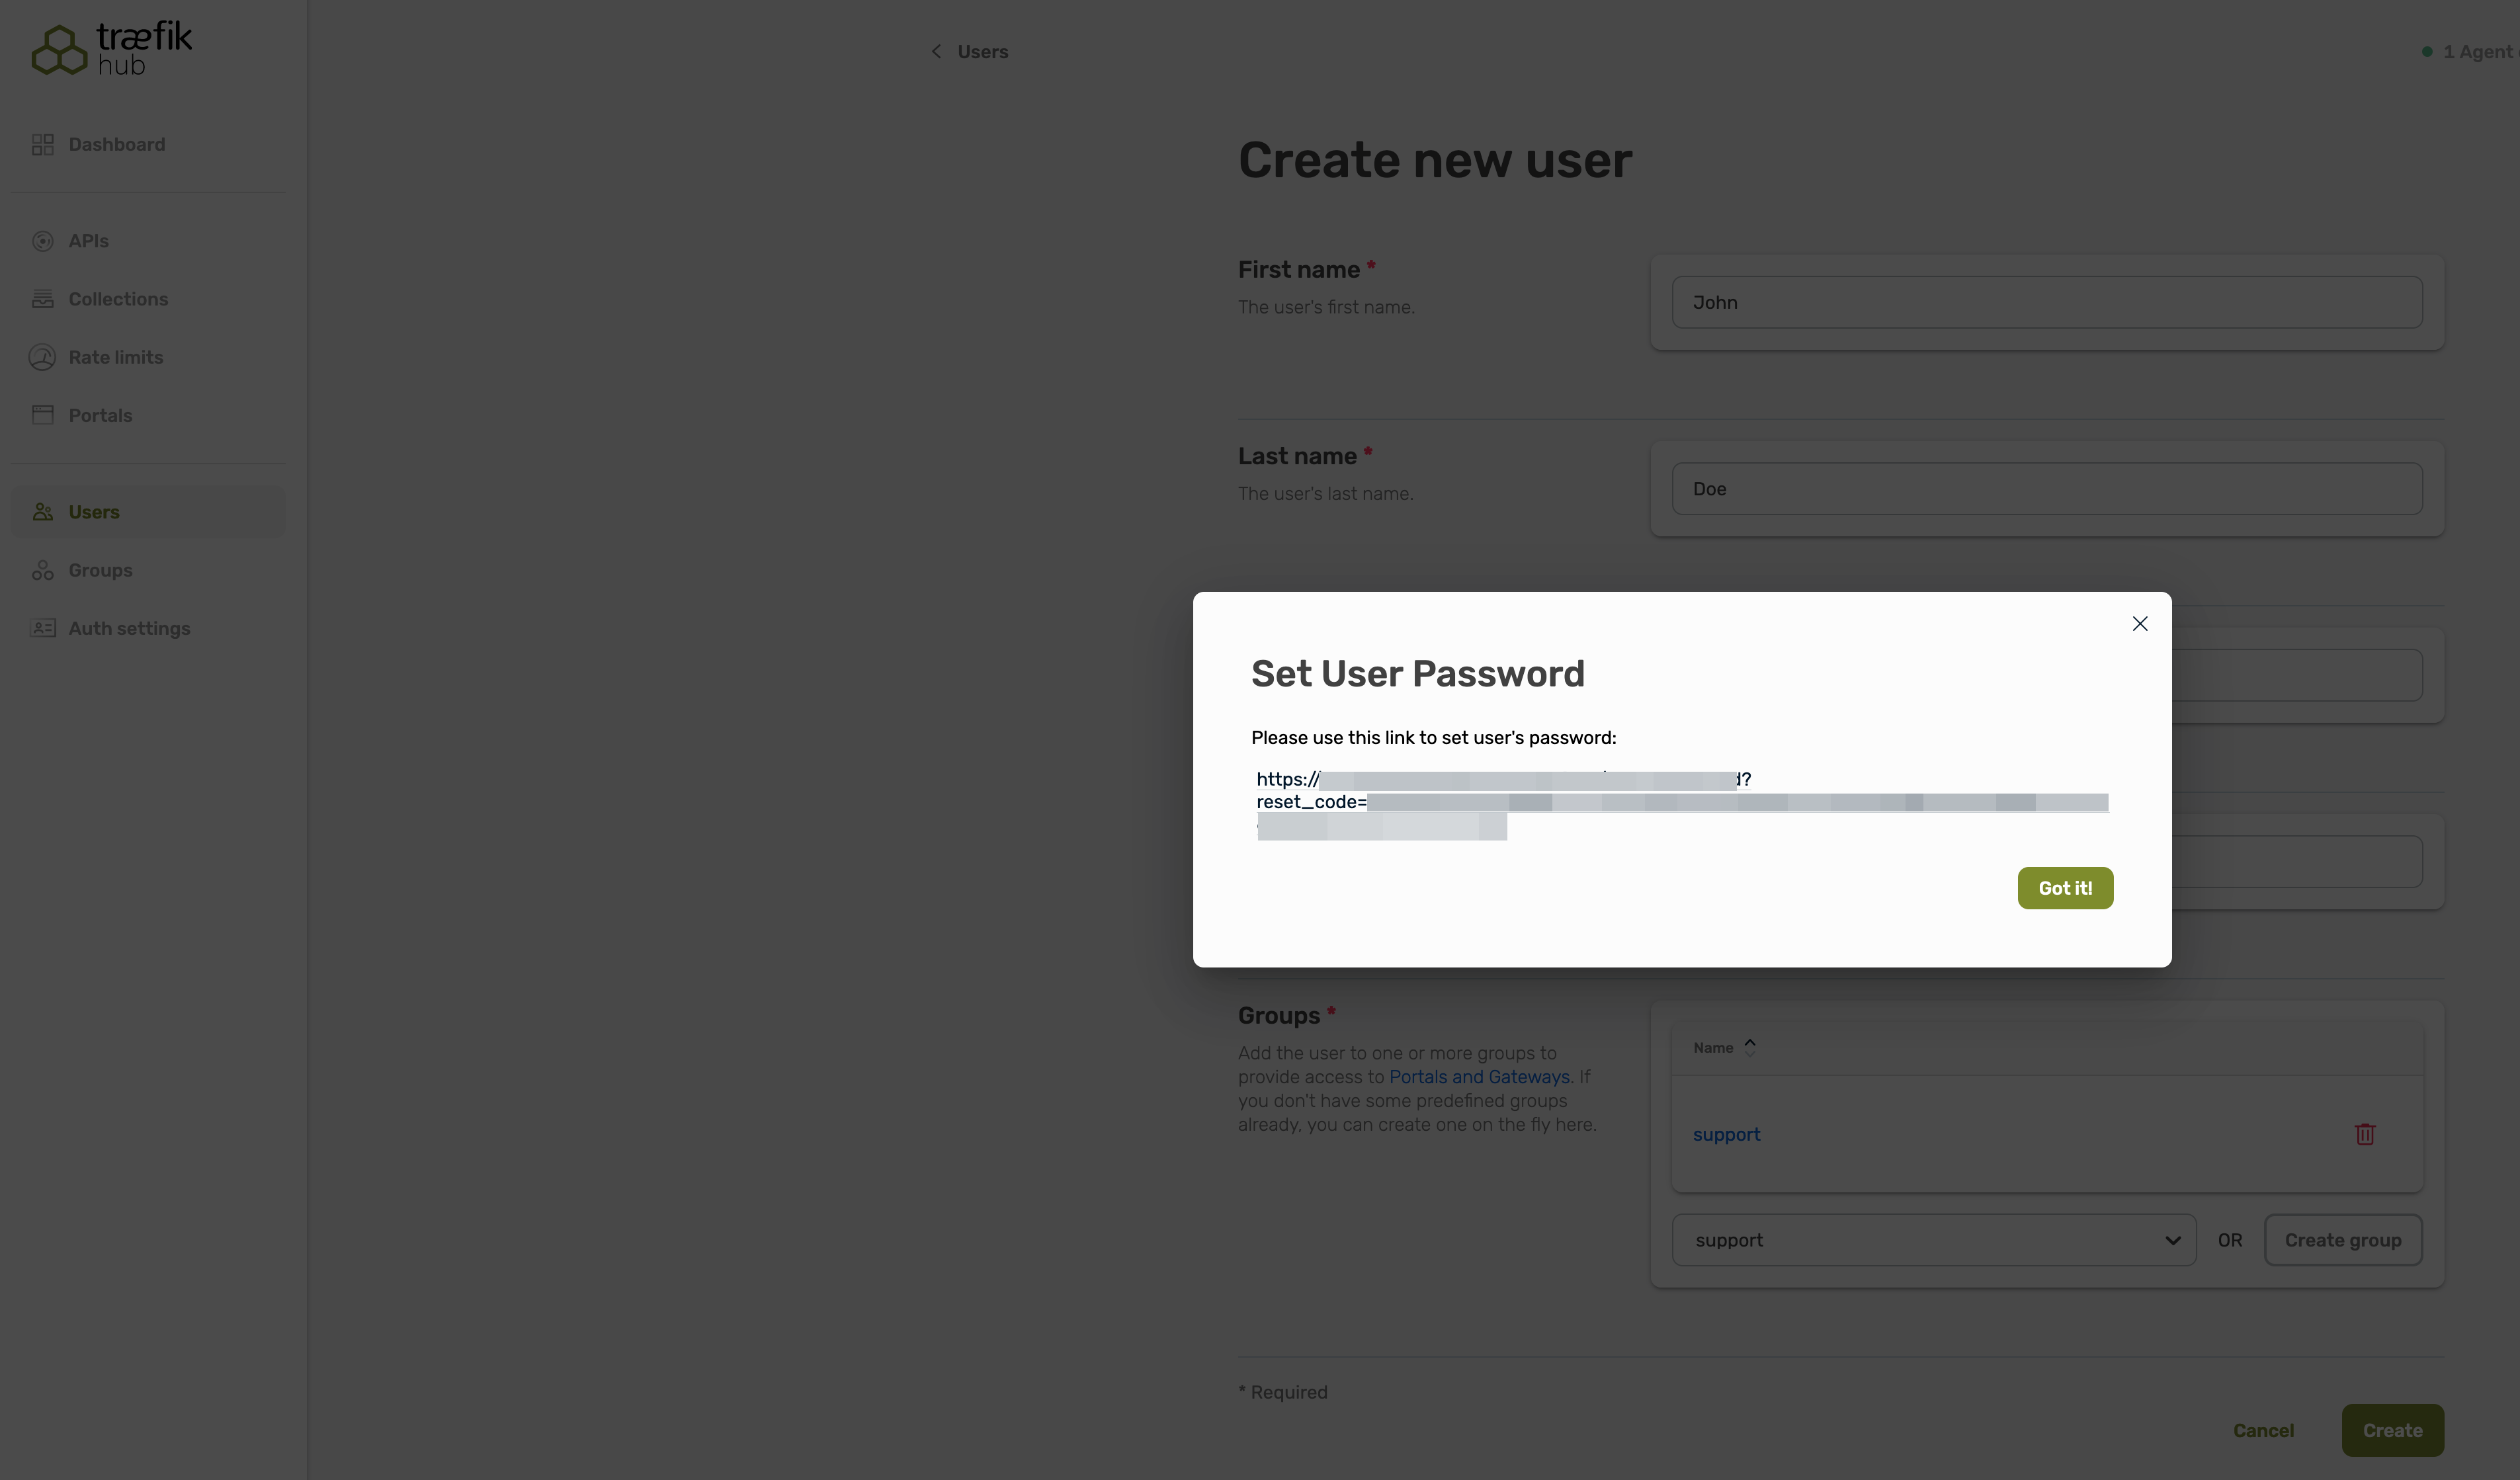 Follow the screen instructions to set a password for the user.